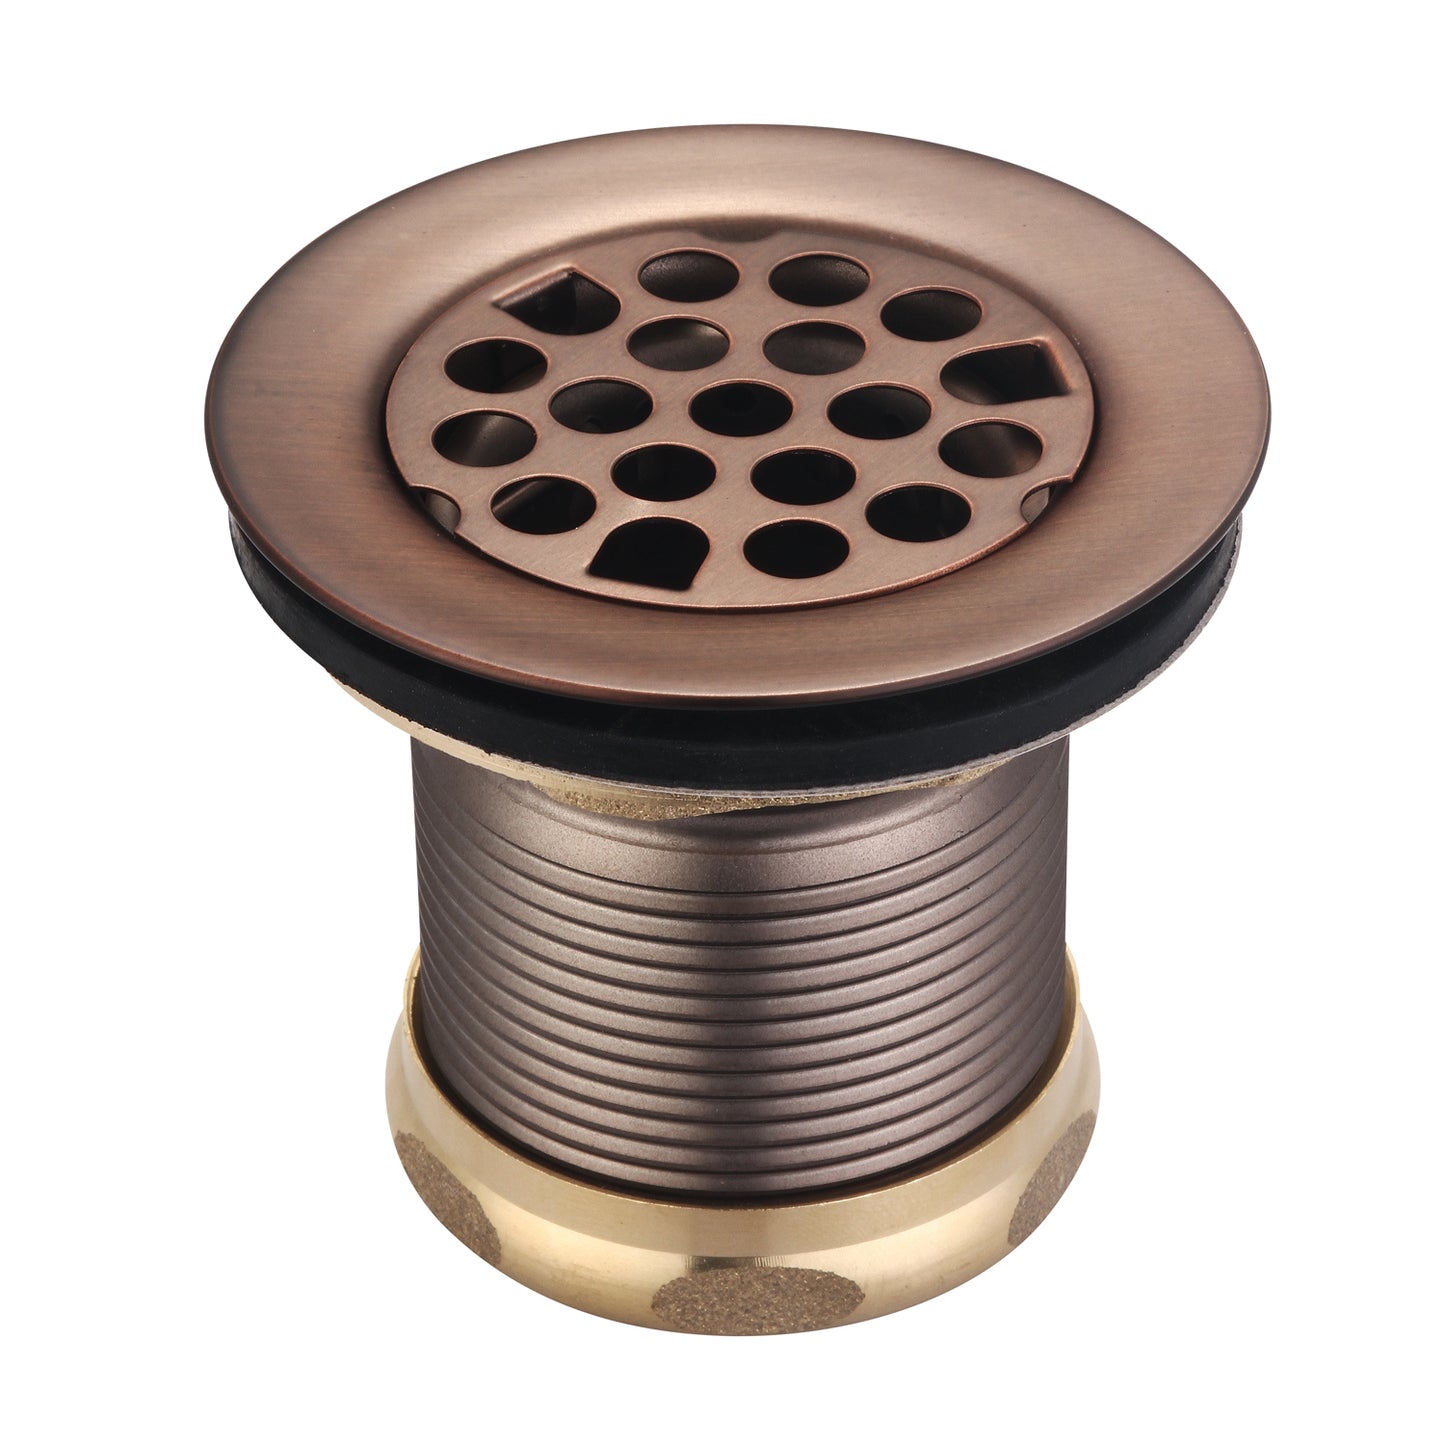 Bar Sink Drain 2" with Steel Grid Oil Rubbed Bronze